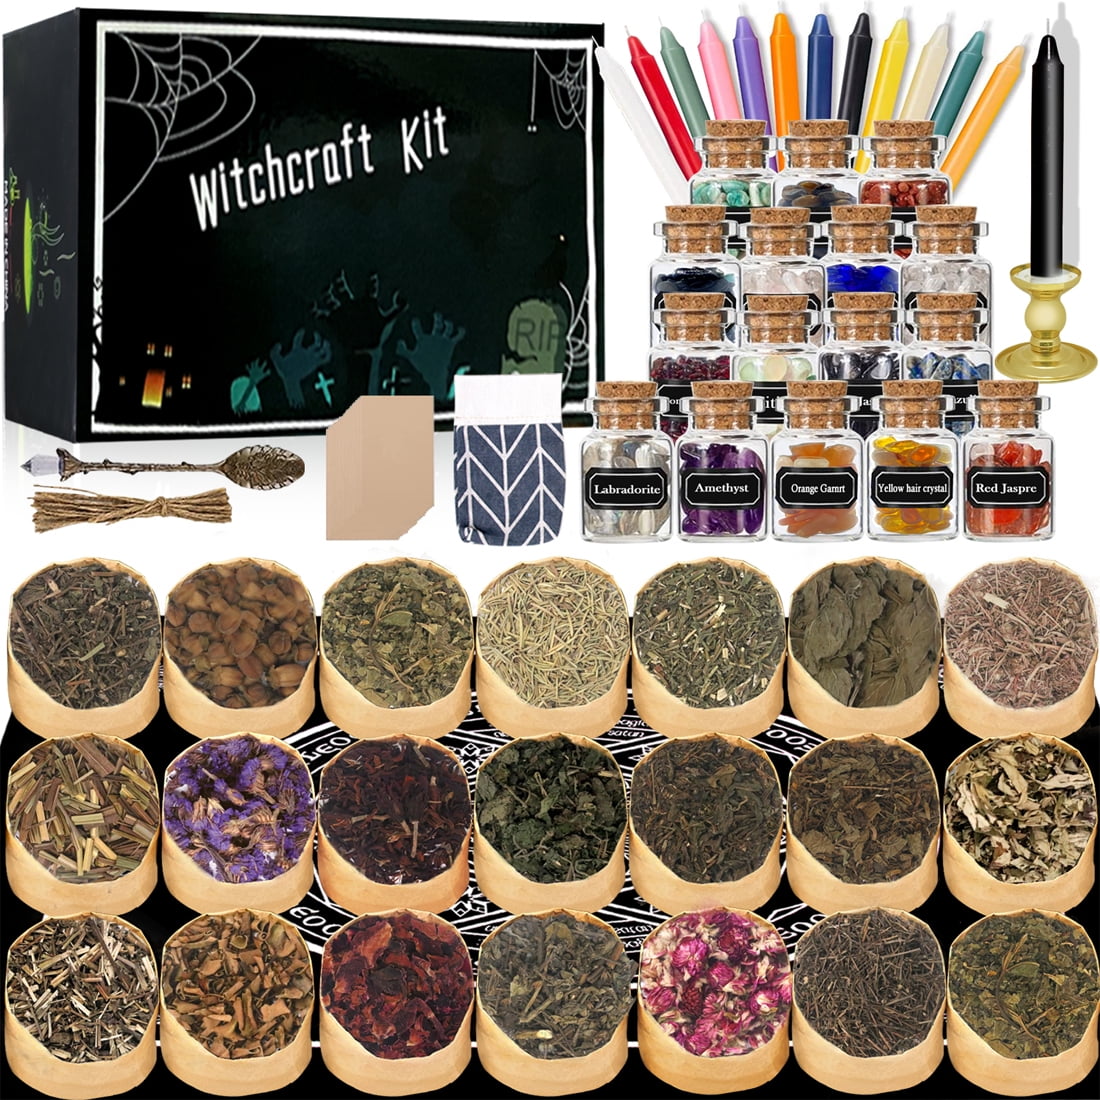 HXXF Witchcraft Supplies Kit 110 PCS, Beginner Witchcraft Kit for Altar  Supplies,Wiccan Supplies and Tools- Crystal Jars, Dried Herbs, Colored  Candles, Spiritual Items for Witch Spells Altar Decor 